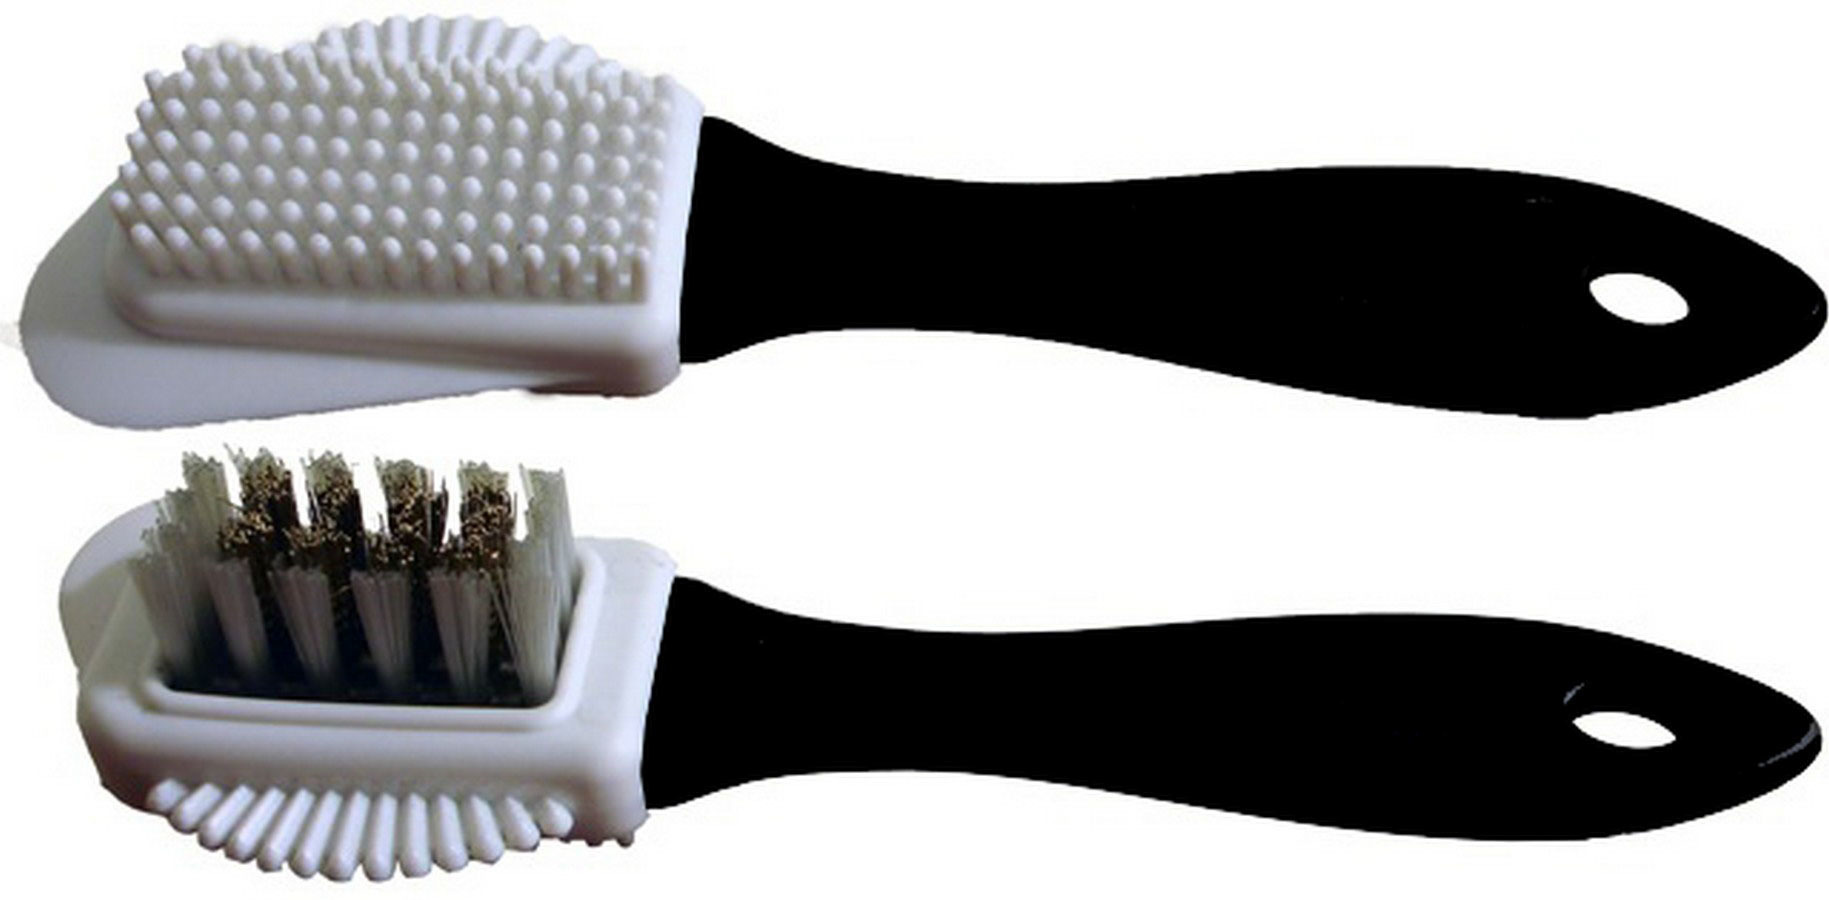 MPI USA MPI-A-SB Cleaning Brush, Suede / Plastic, White, Each